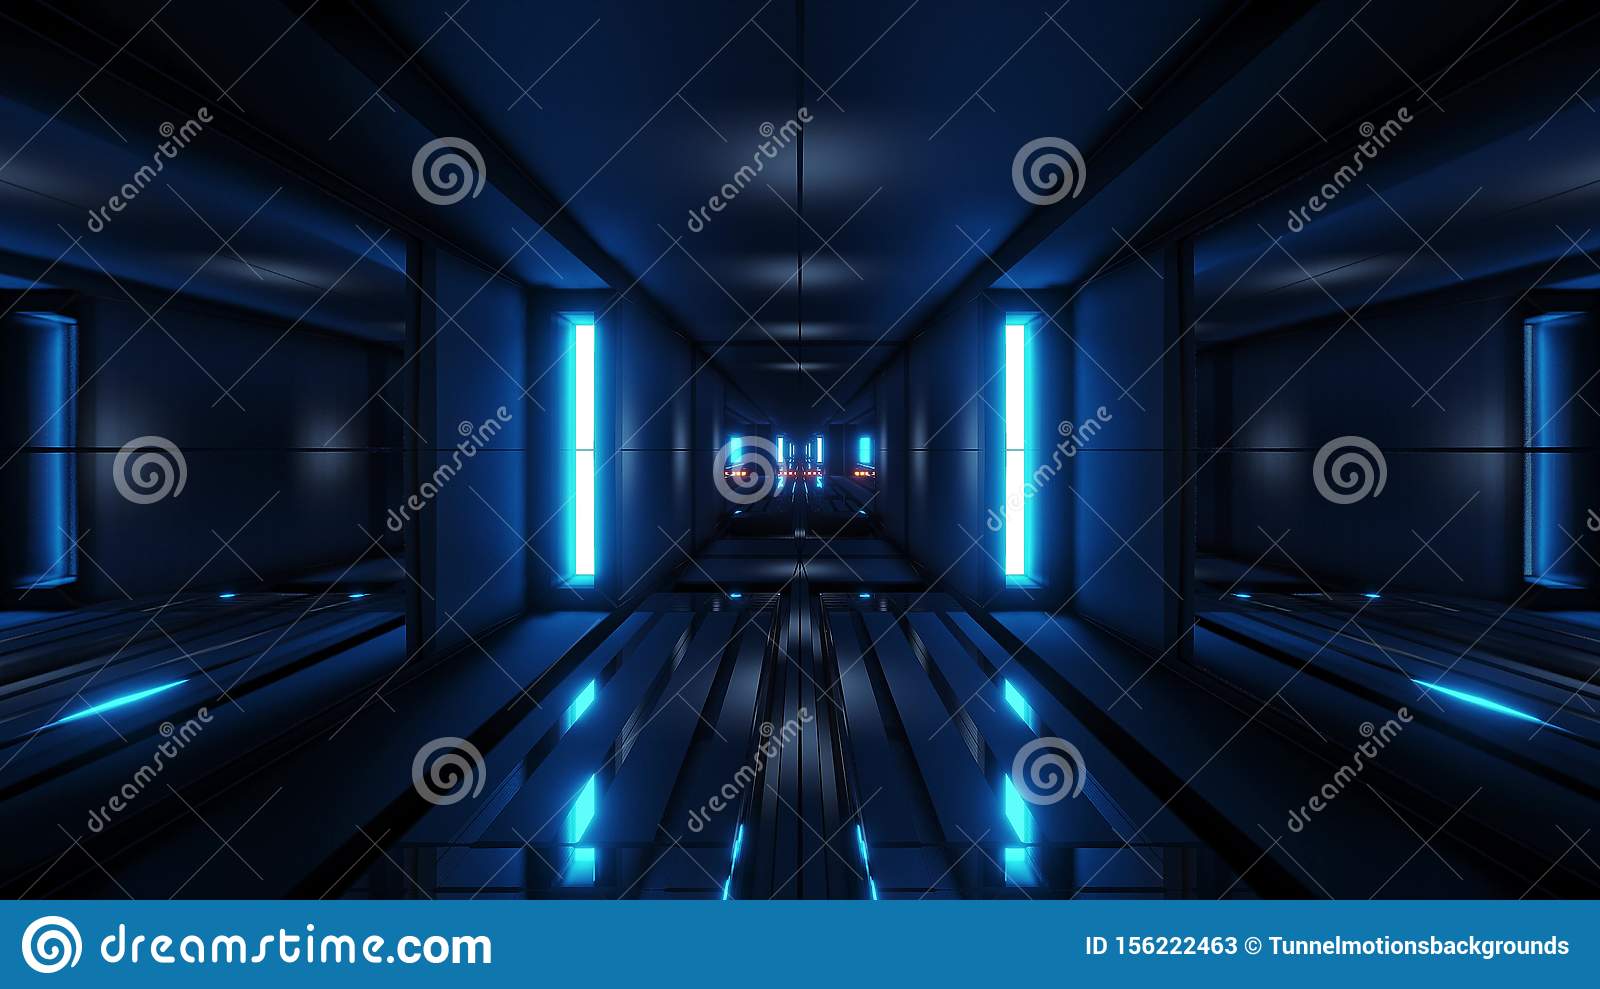 Clean style blck tunnel corridor background with blue glow background d rendering stock illustration